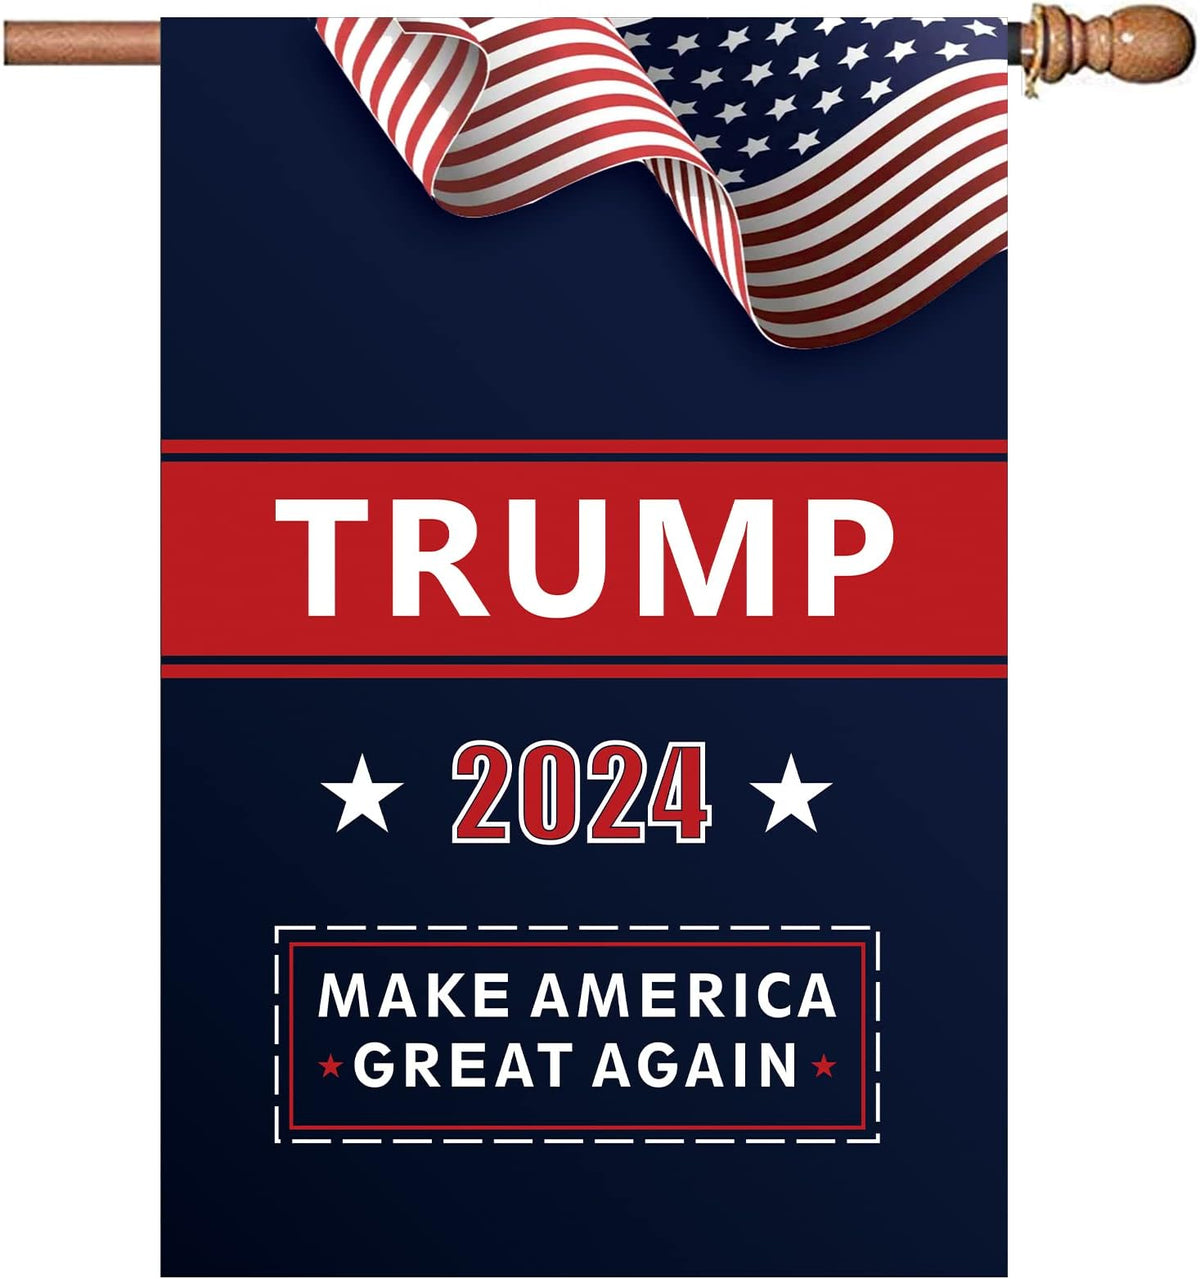 Donald Trump 2024 House Garden Flags- Make America Great Again - Double Sided Yard Flag Banner Lawn Outdoor Decoration Election Day 28x40 Inch